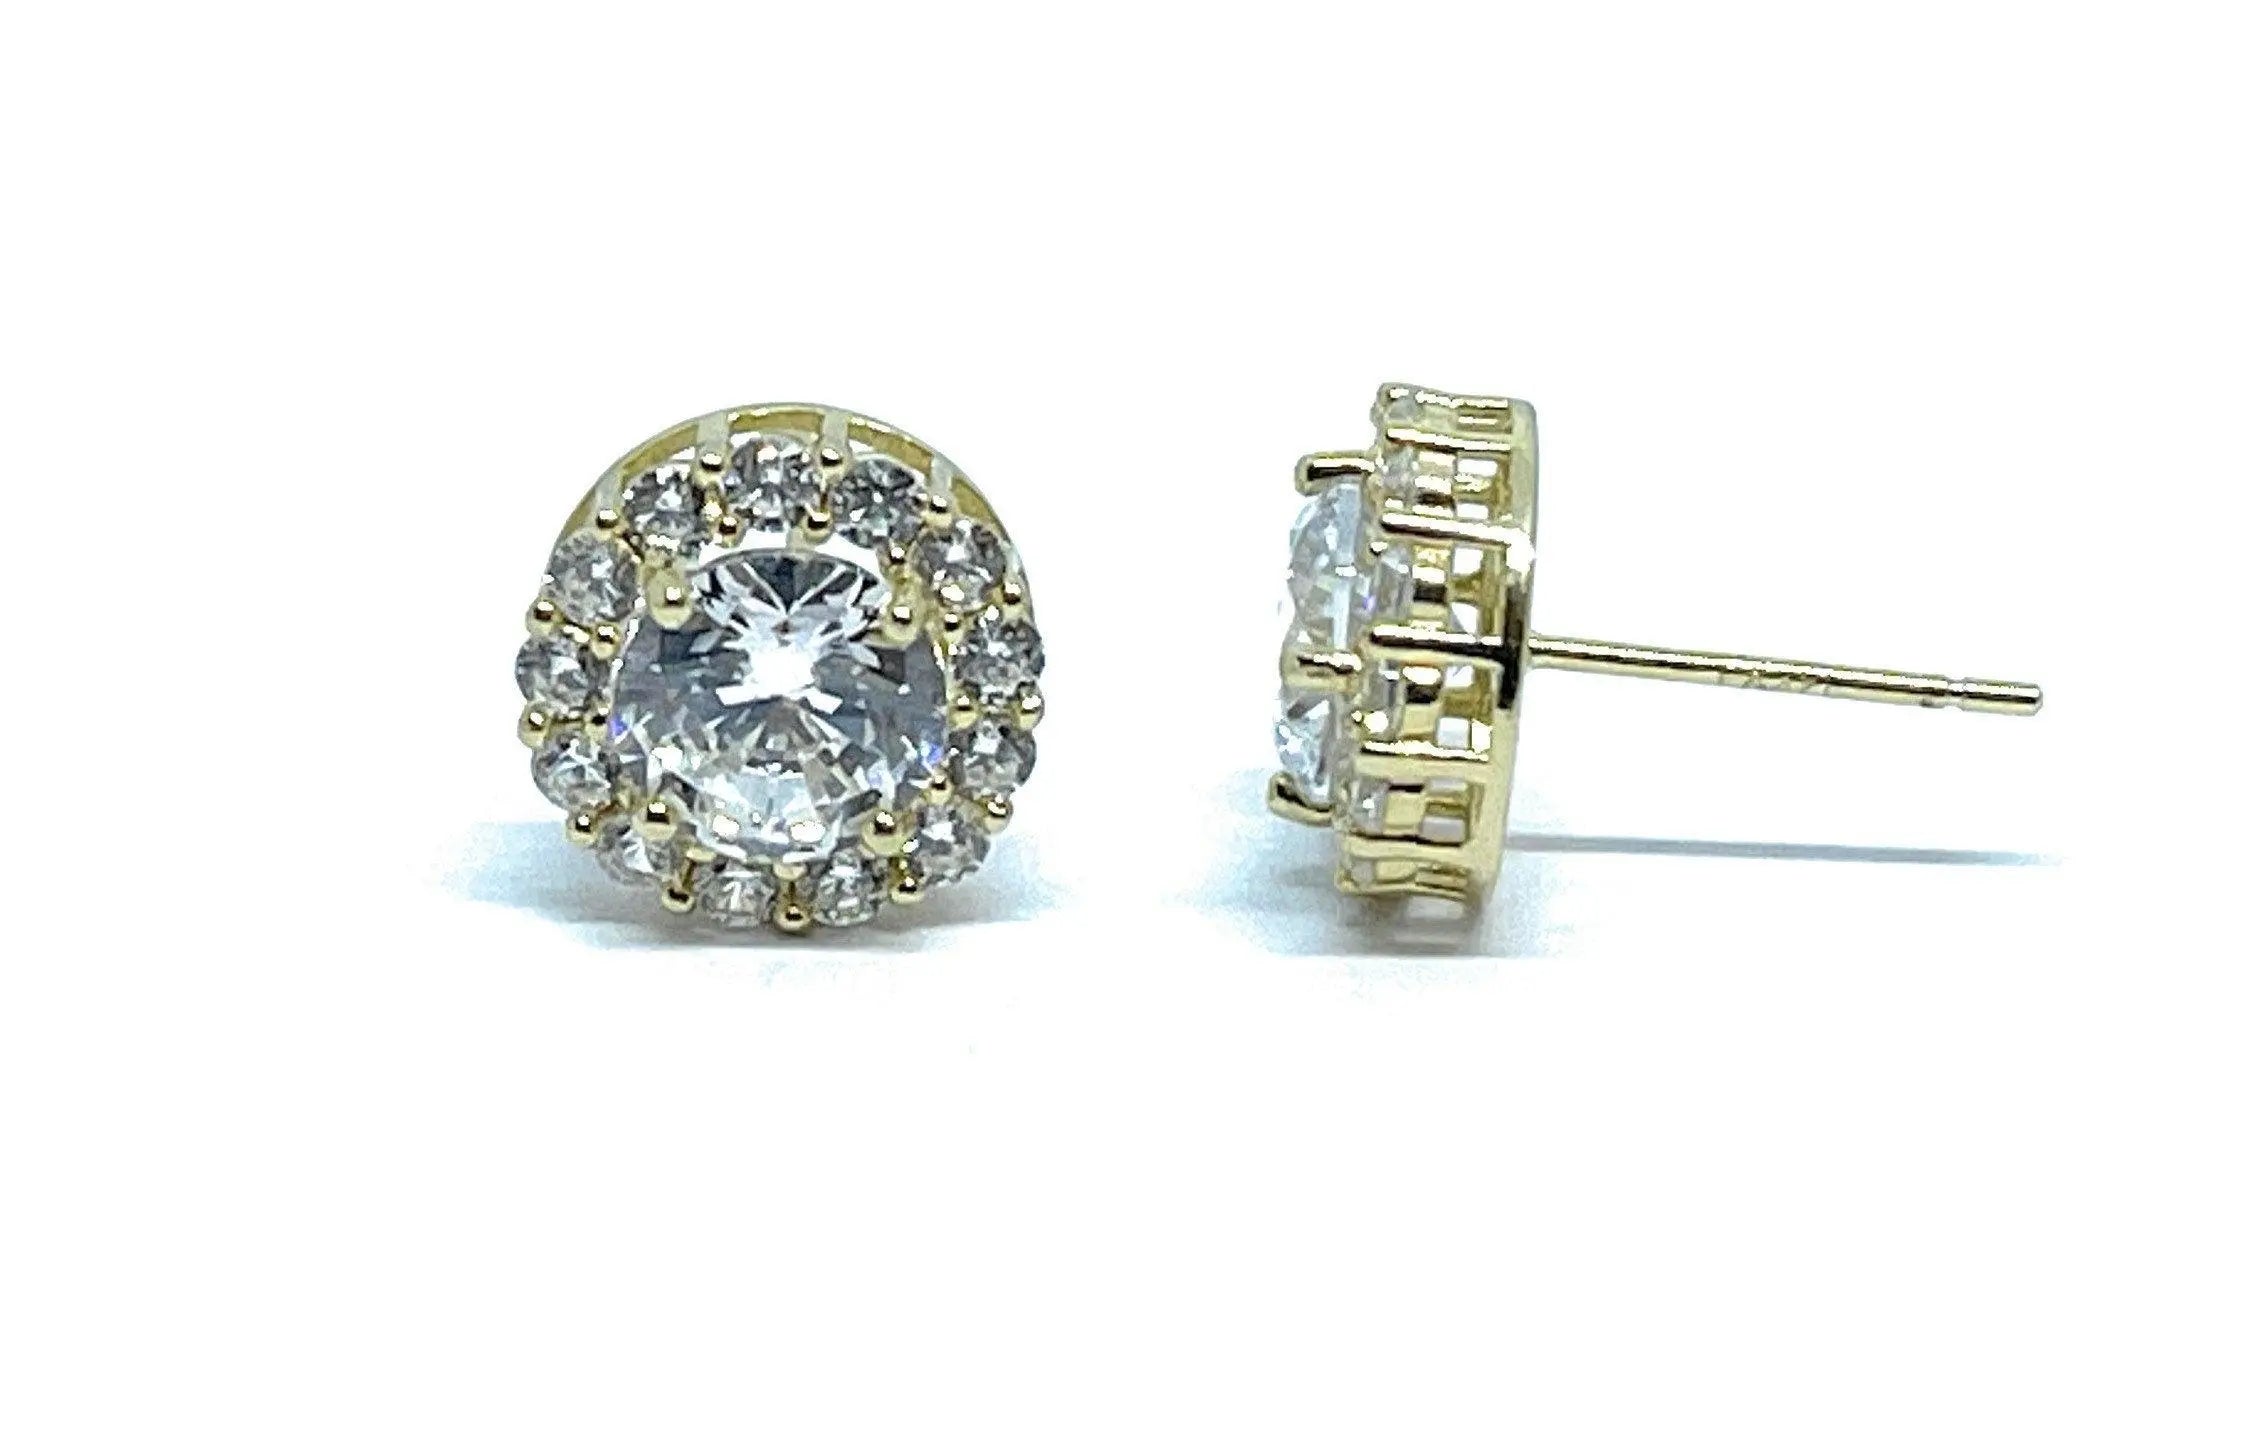 Jewelili Stud Earrings with Cubic Zirconia Solitaire in 10K Yellow Gold